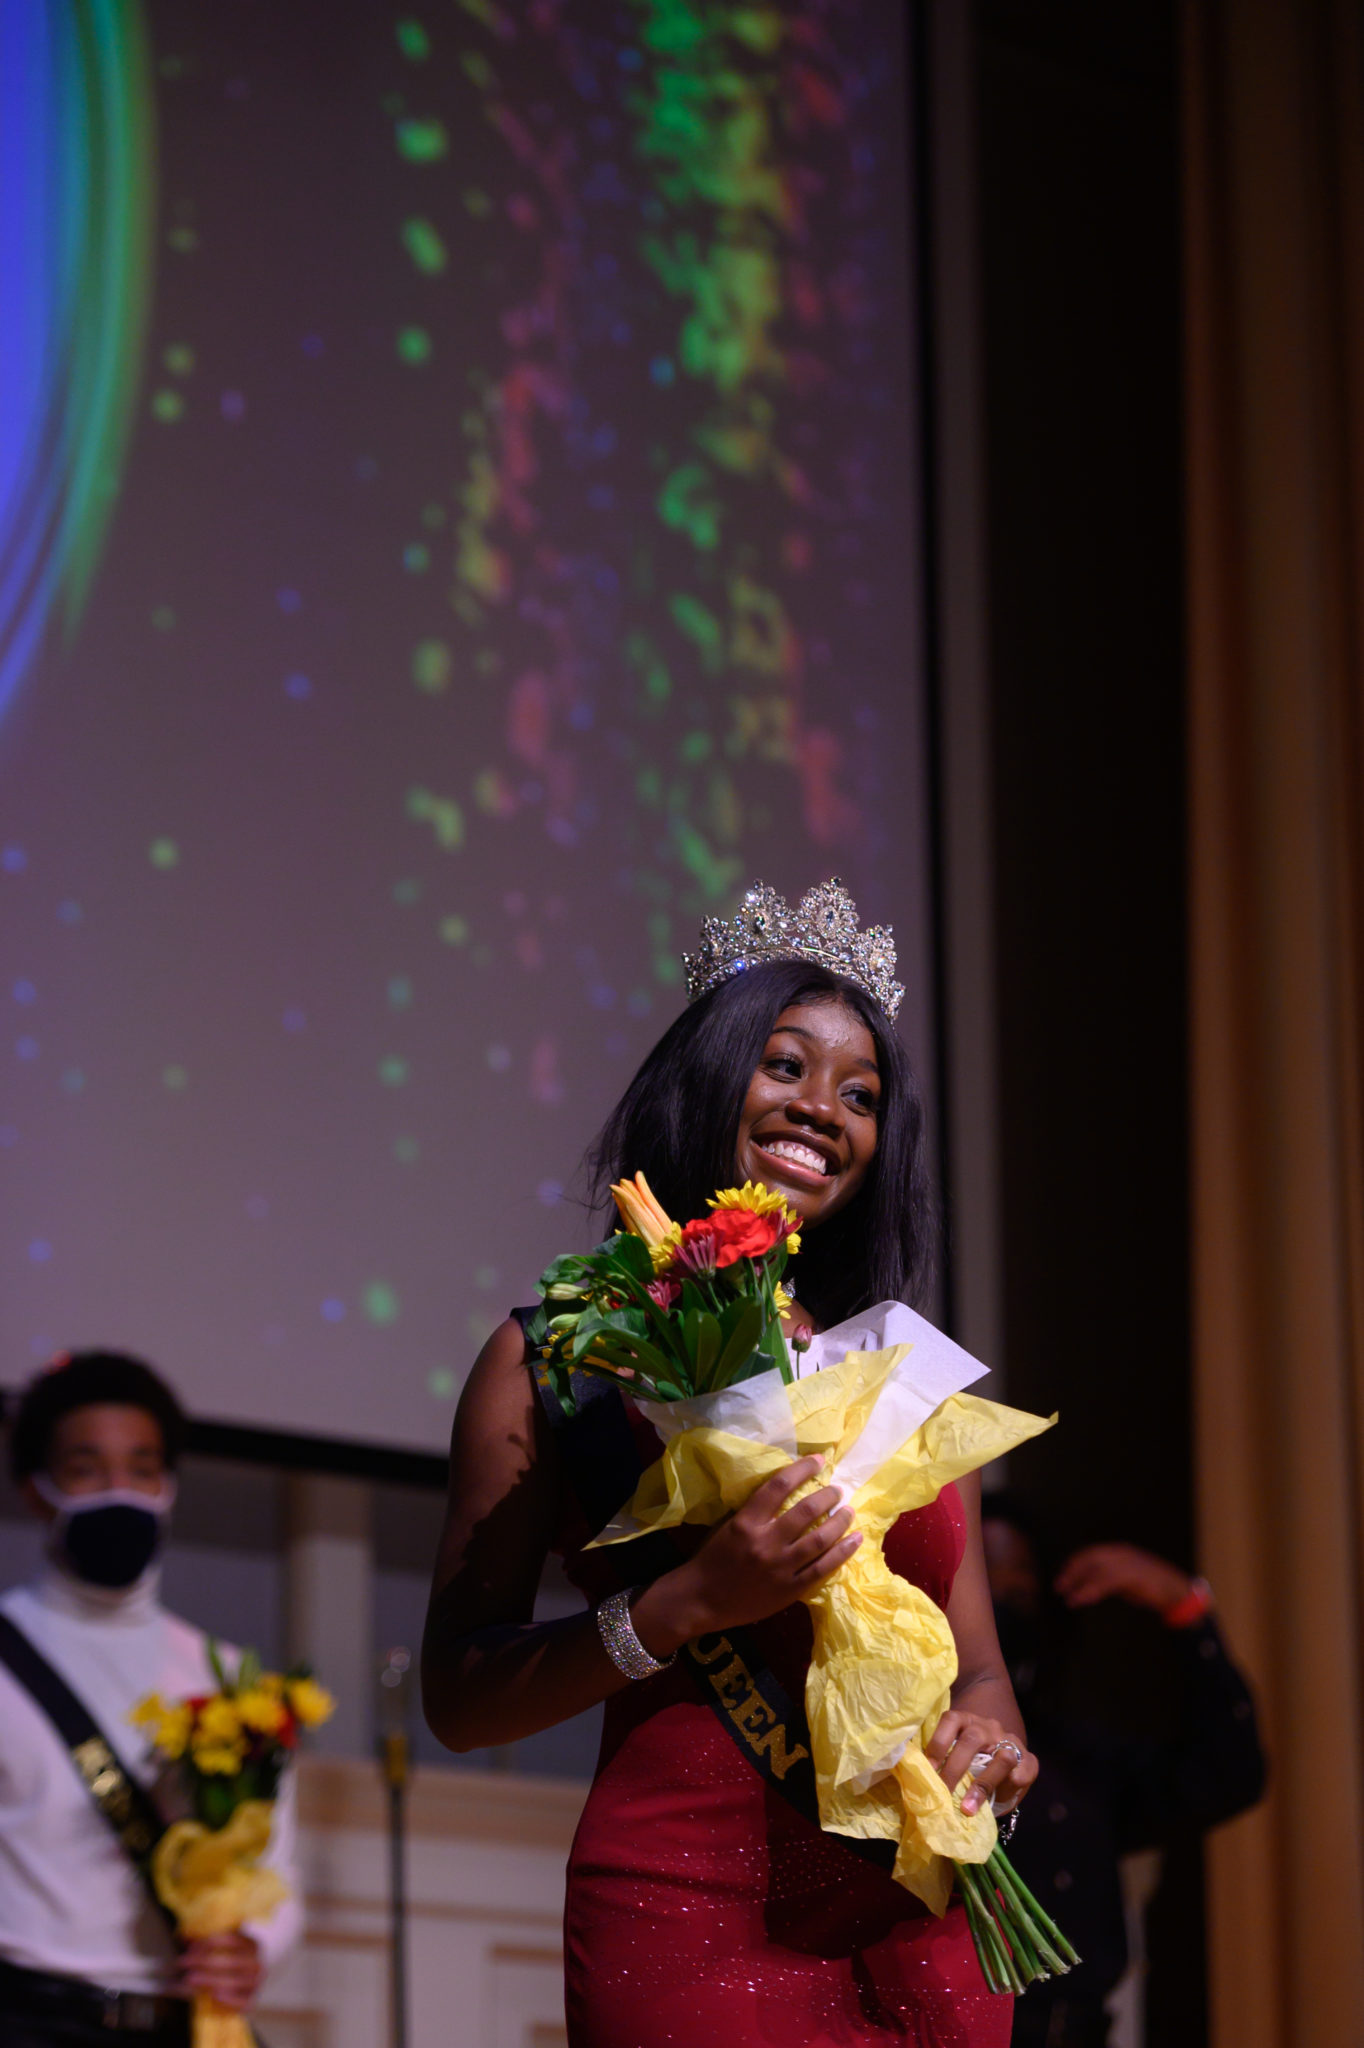 Photo of the Black Student Union Pageant Queen